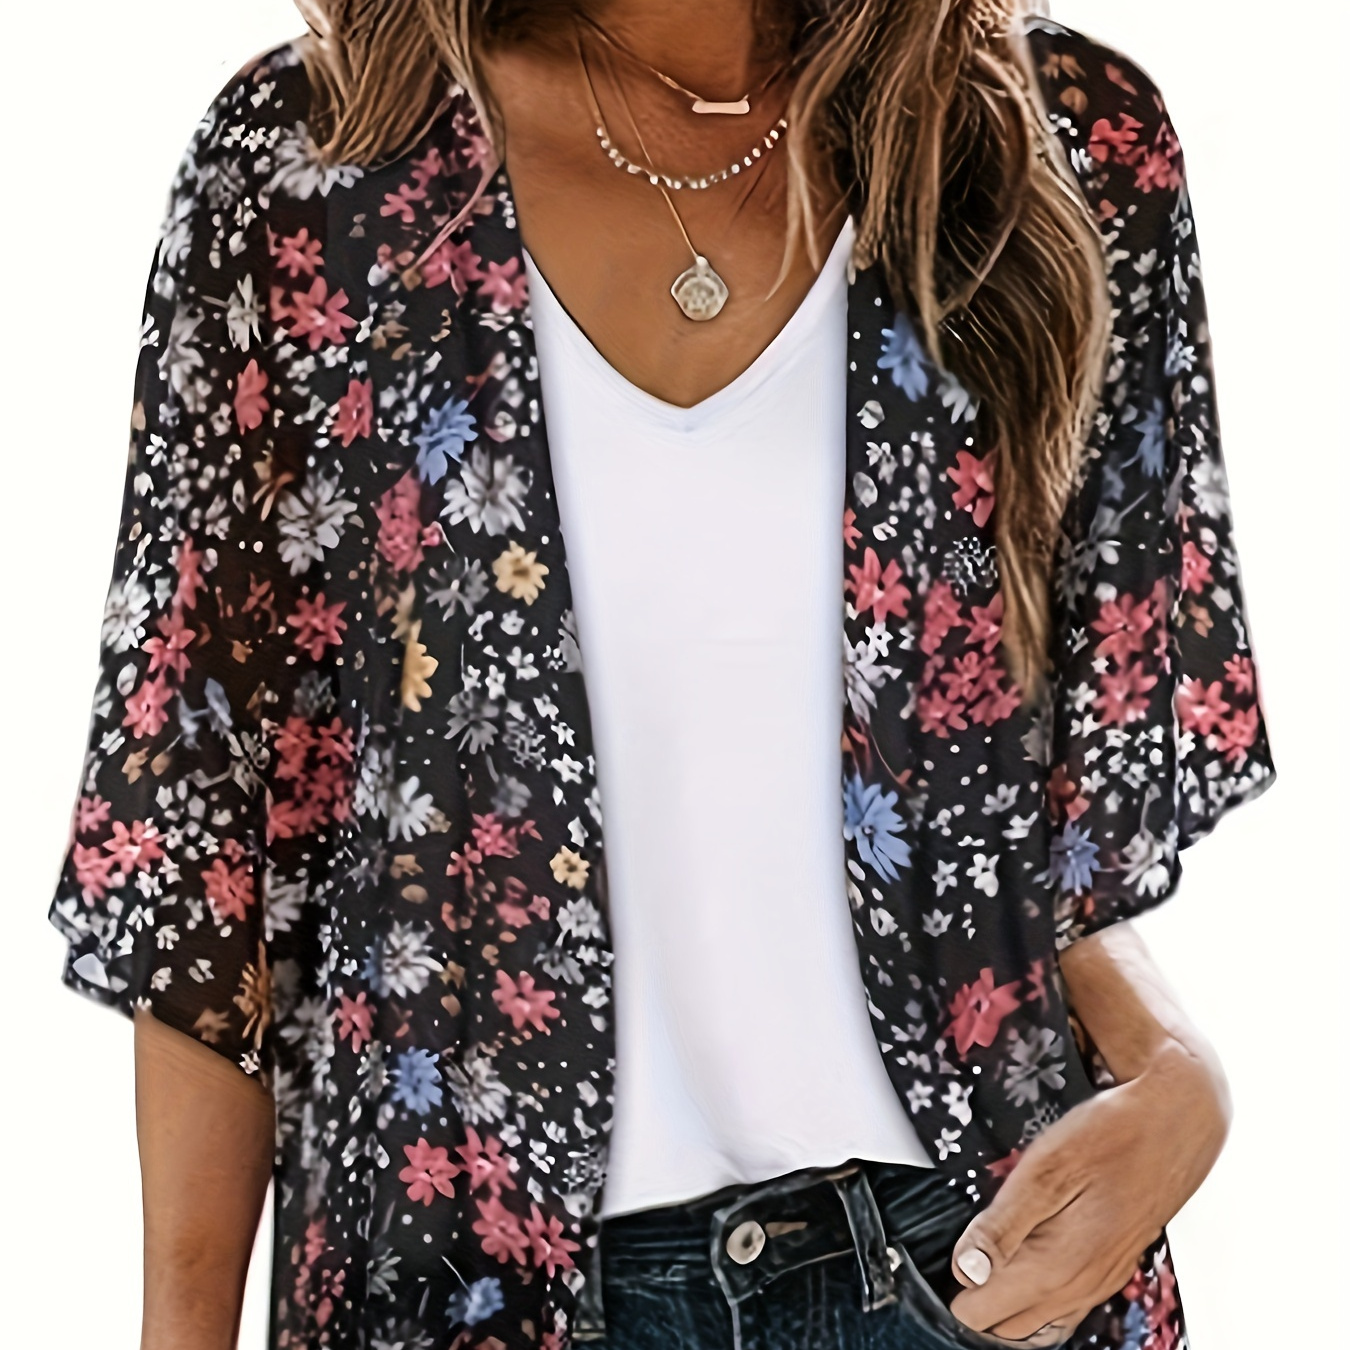 

Women's Floral Print Kimono Cardigan, Casual Loose Fit Bubble Sleeve Cover-up, Light Summer Front Top, Breezy Boho Style